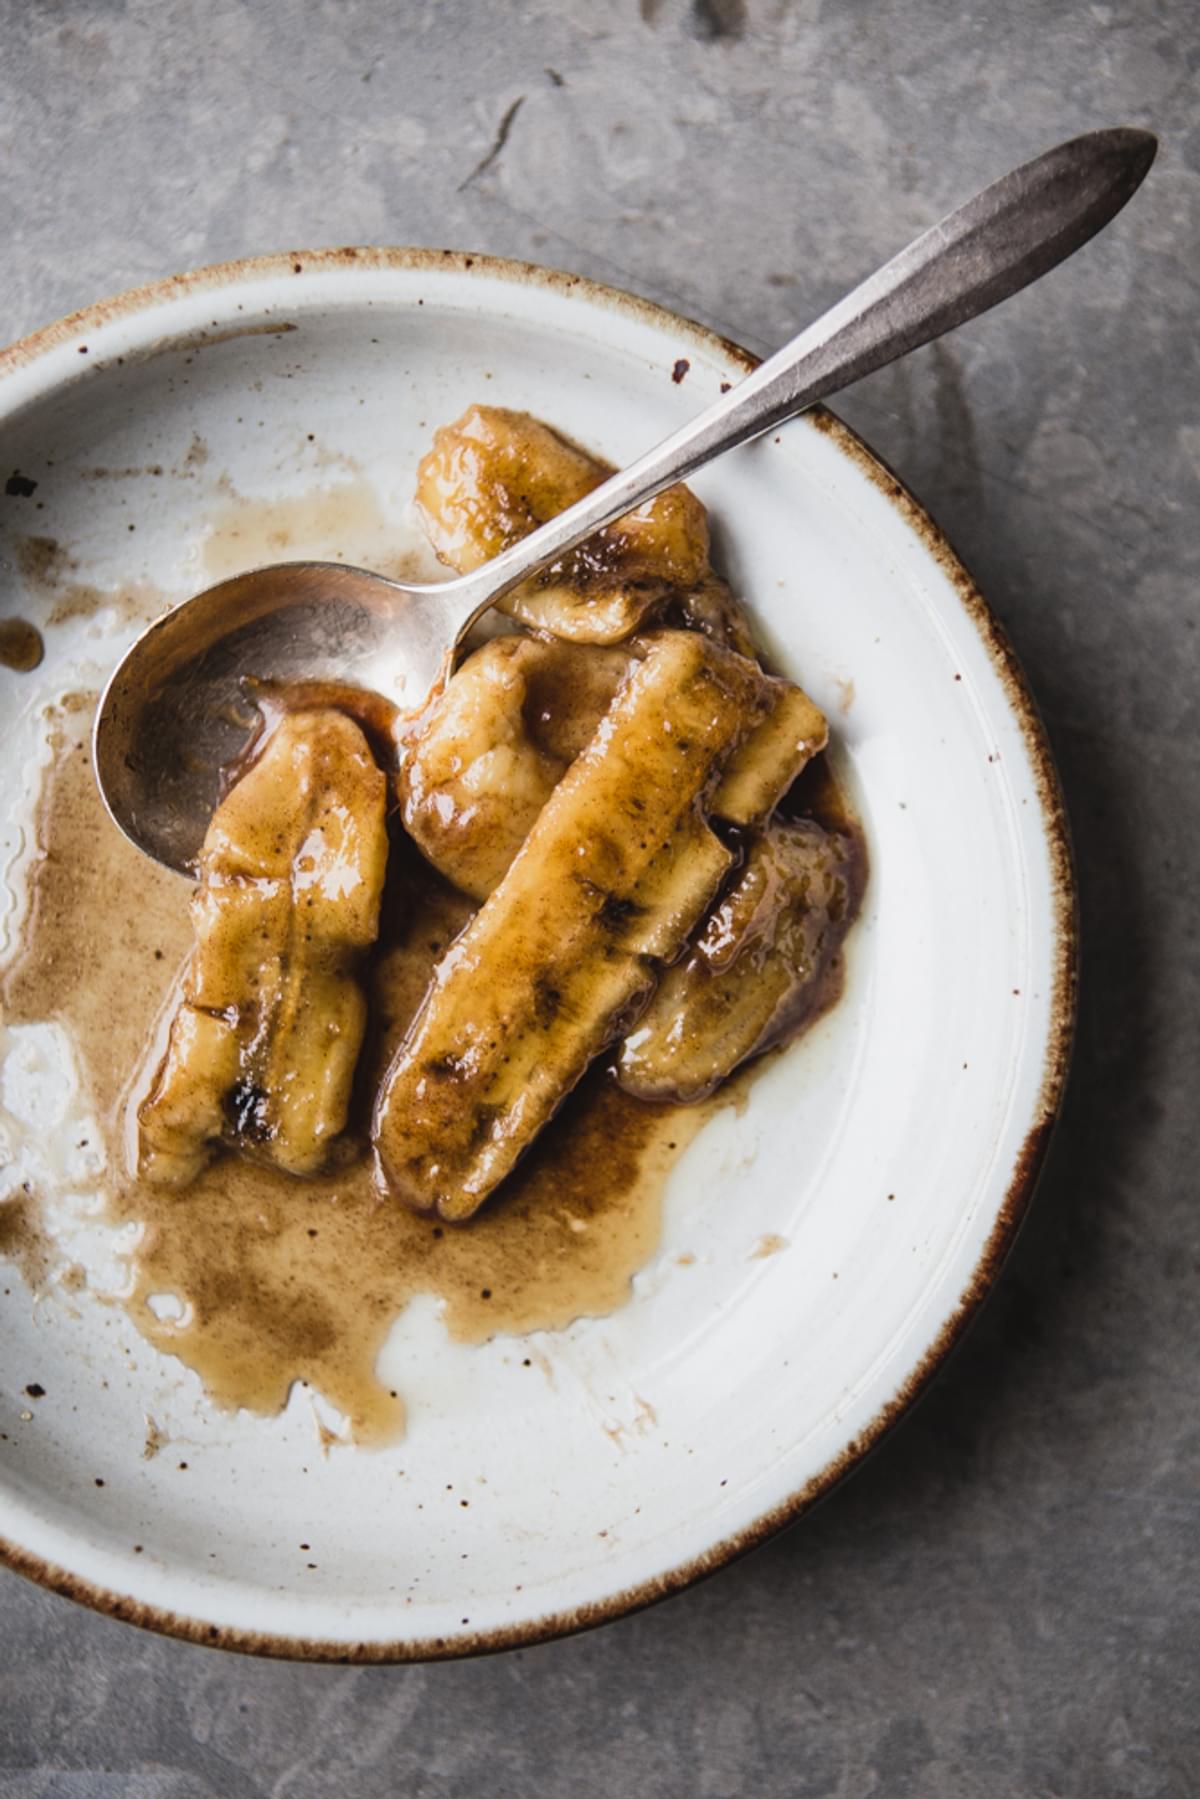 Caramelized Bananas on a plate with a spoon